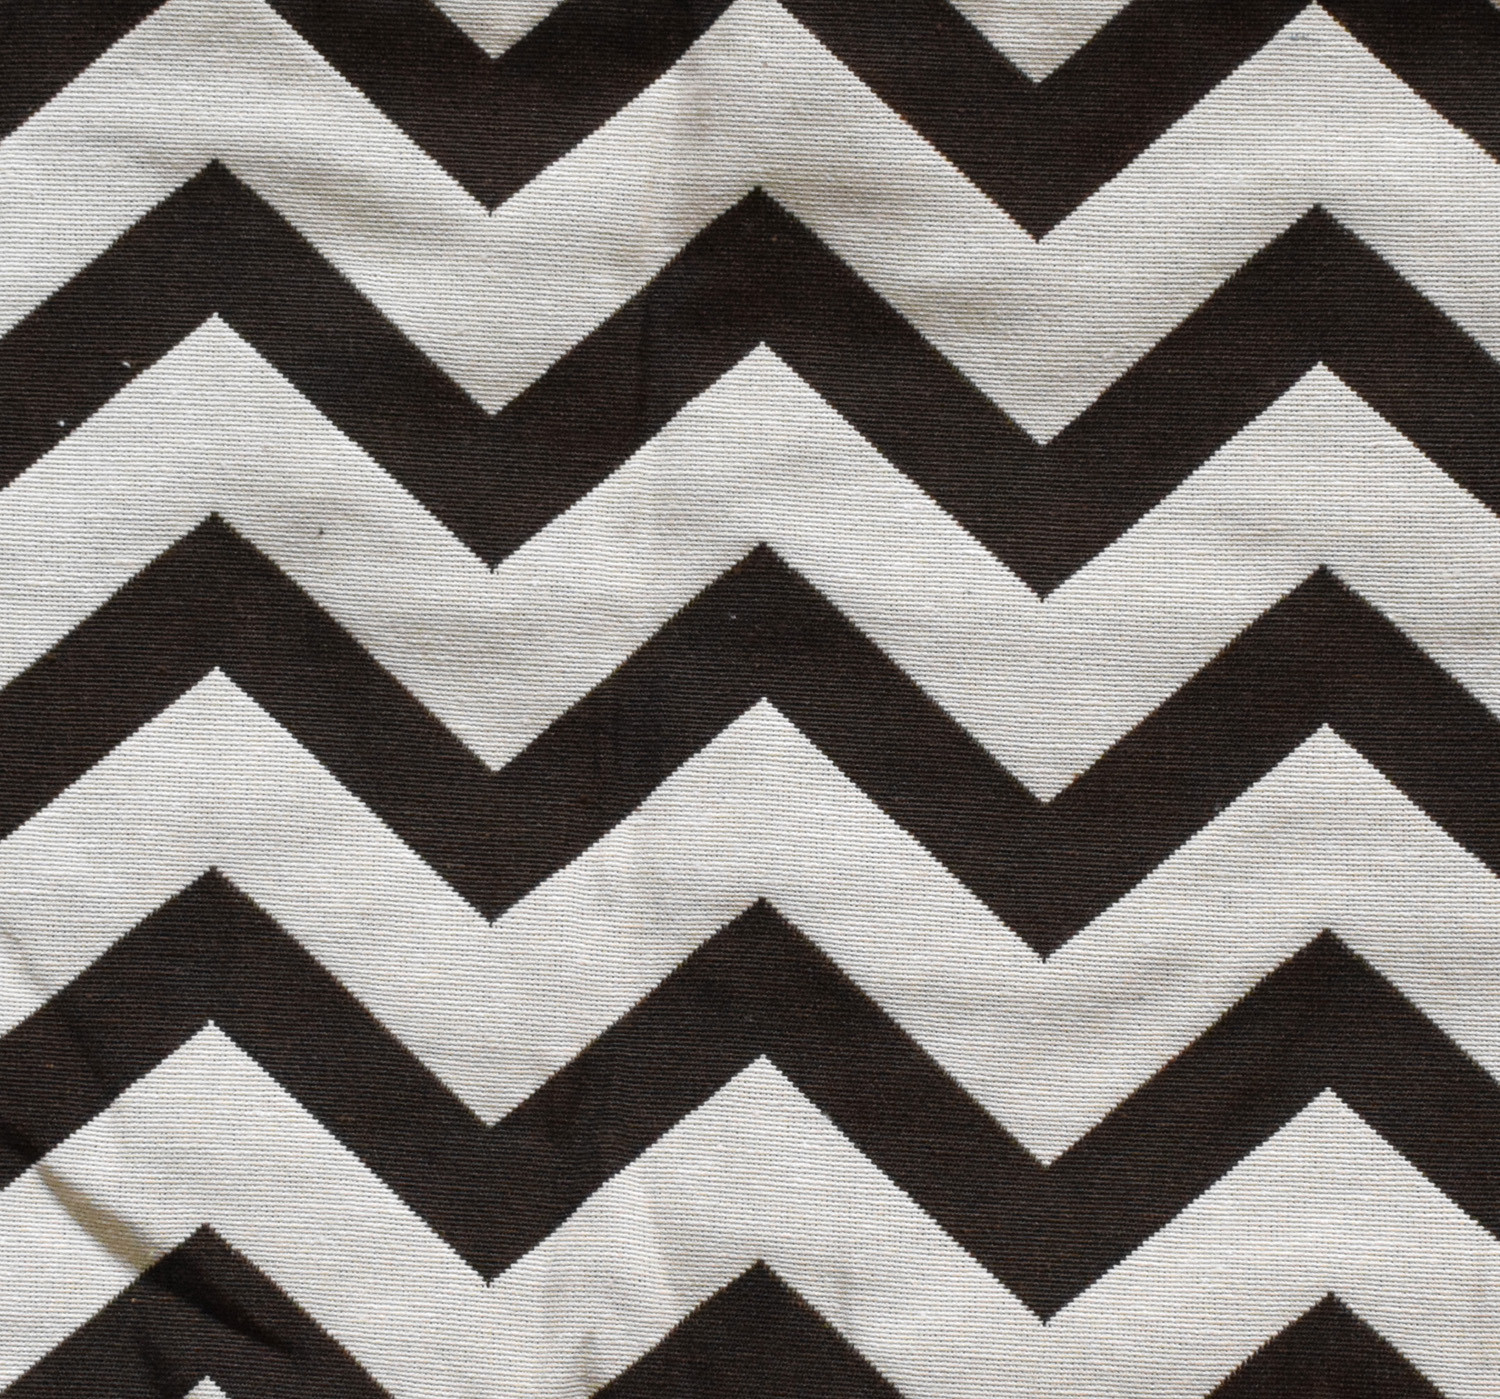 Kuber Industries Cotton Zig Zag Print 4 Seater Center Table Cover/Table Cloth For Home Decorative 60 In. x 40 In. (Brown) 54KM4377